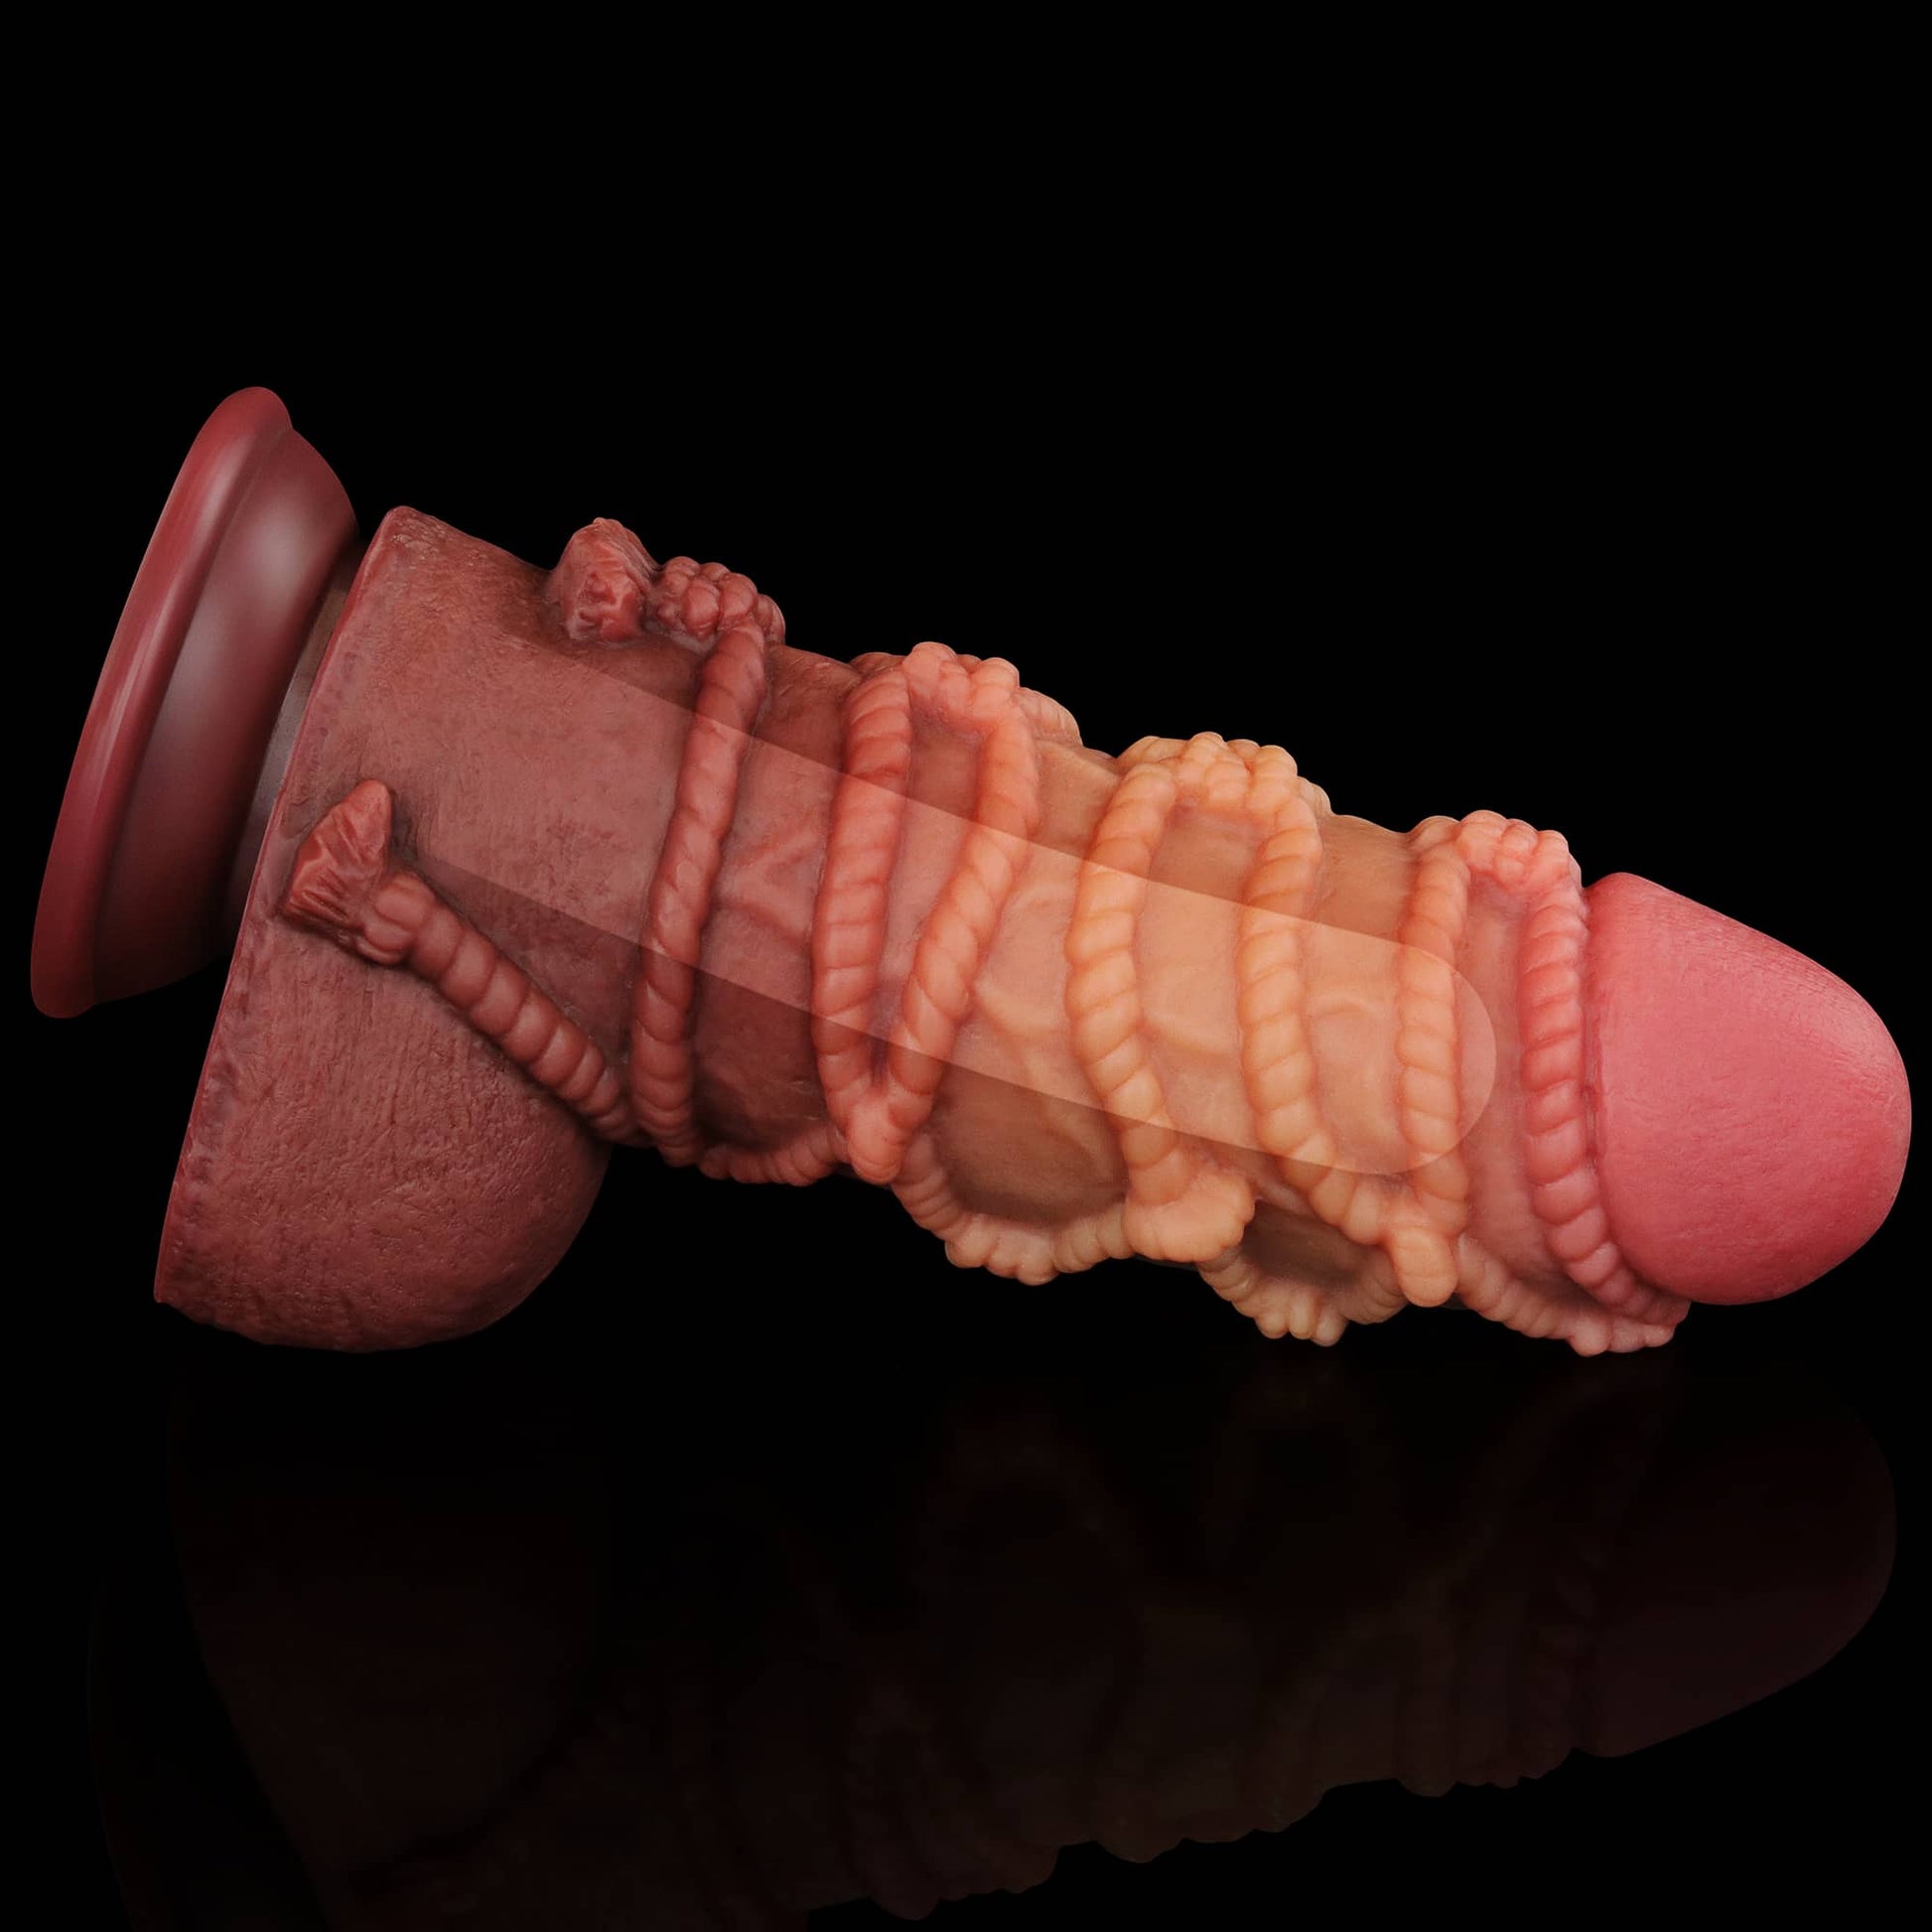 The 9.5 inches silicone realistic rope dildo has firm silicone inside and ultra soft silicone outside